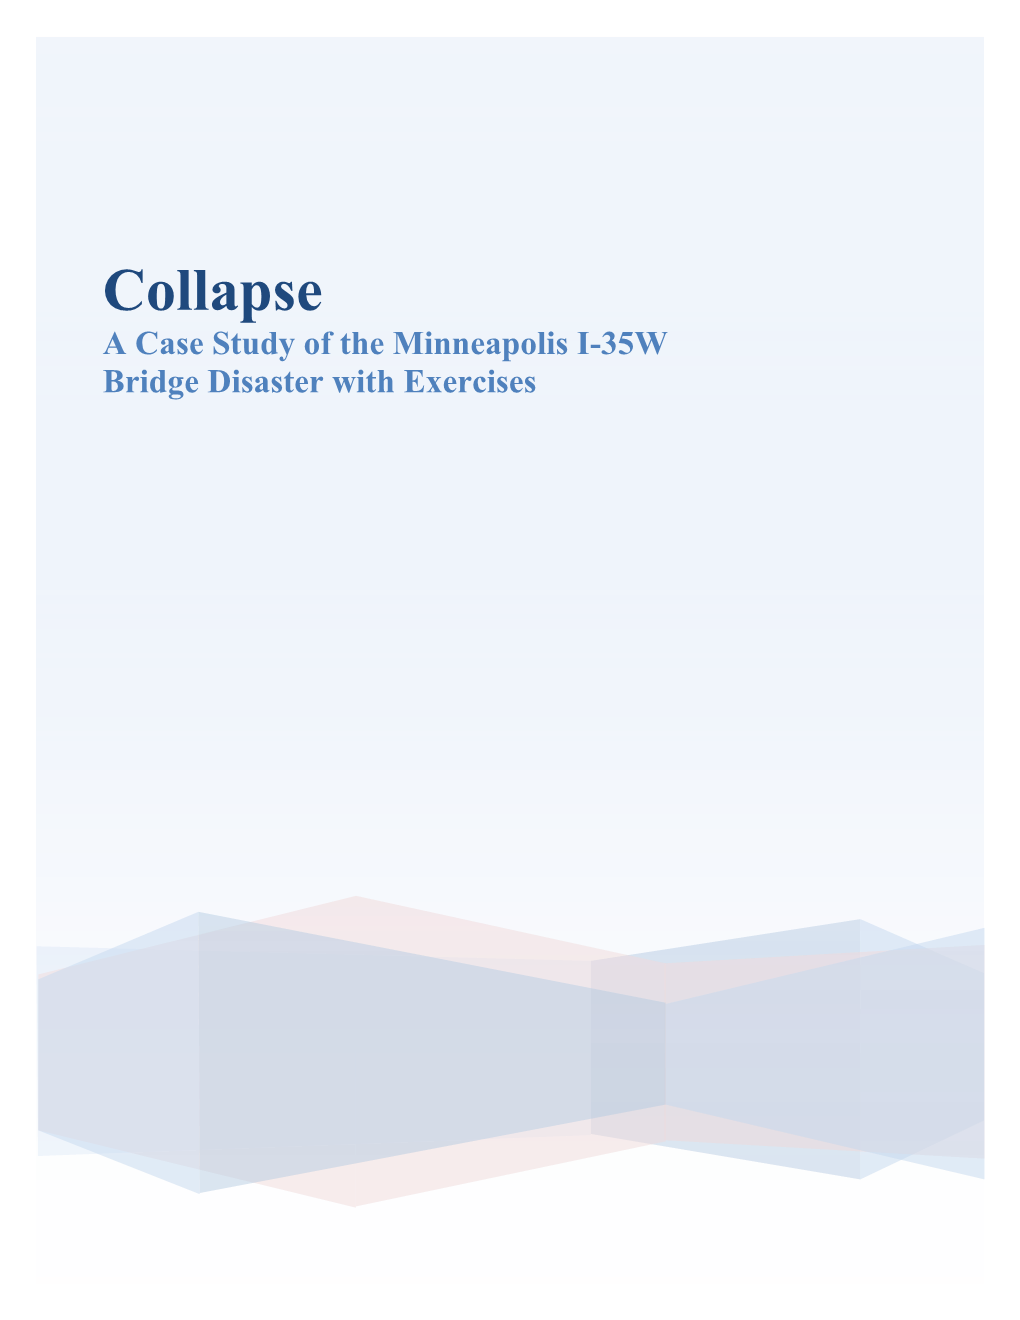 Collapse a Case Study of the Minneapolis I-35W Bridge Disaster with Exercises